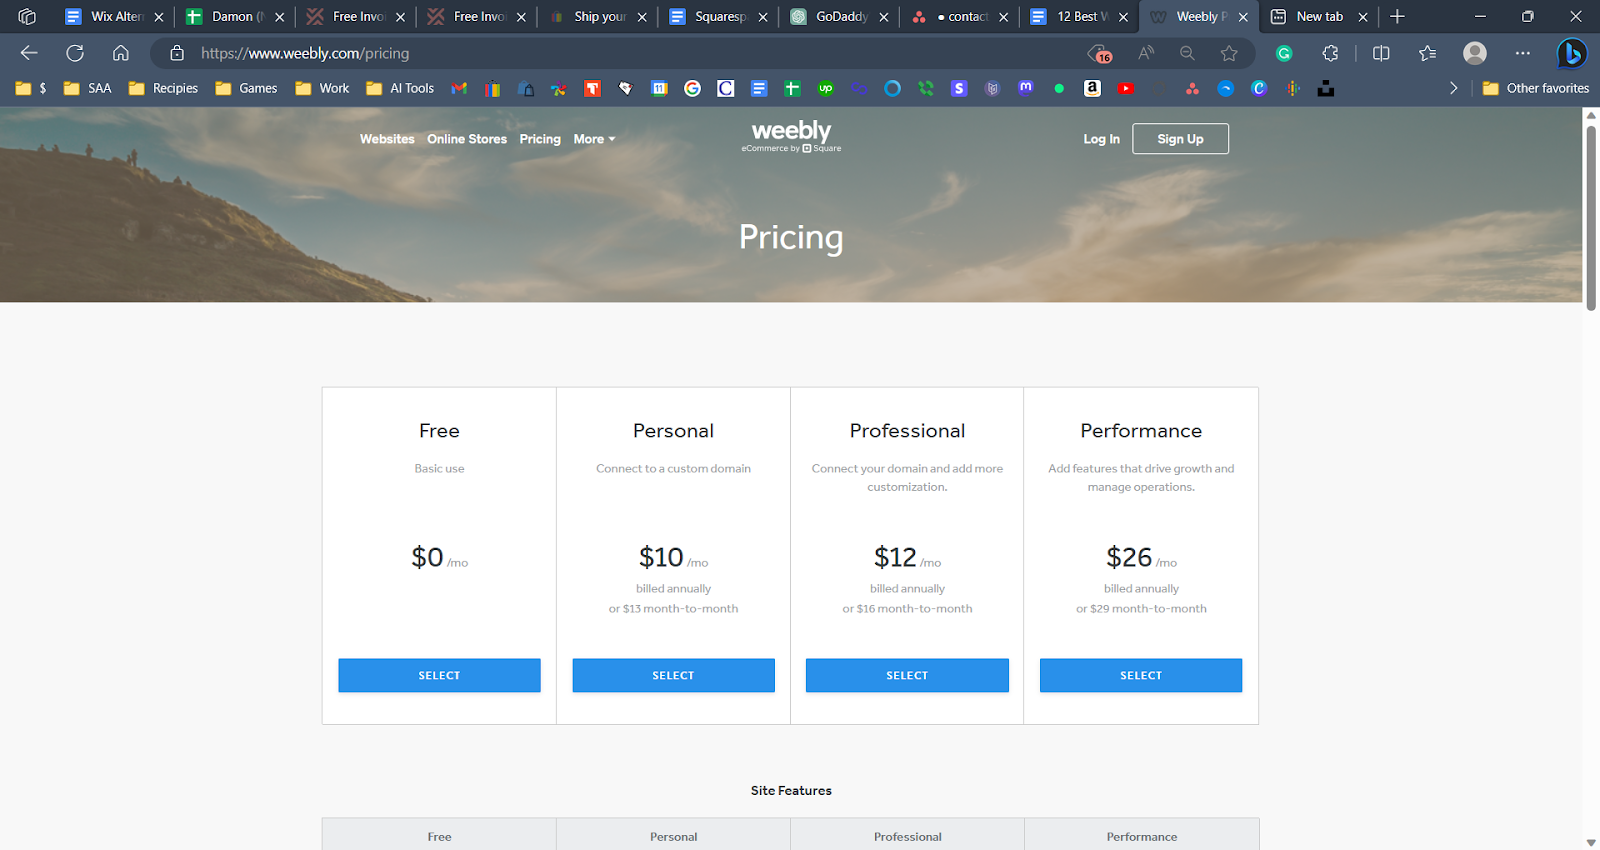 A screenshot of Weebly's pricing plans